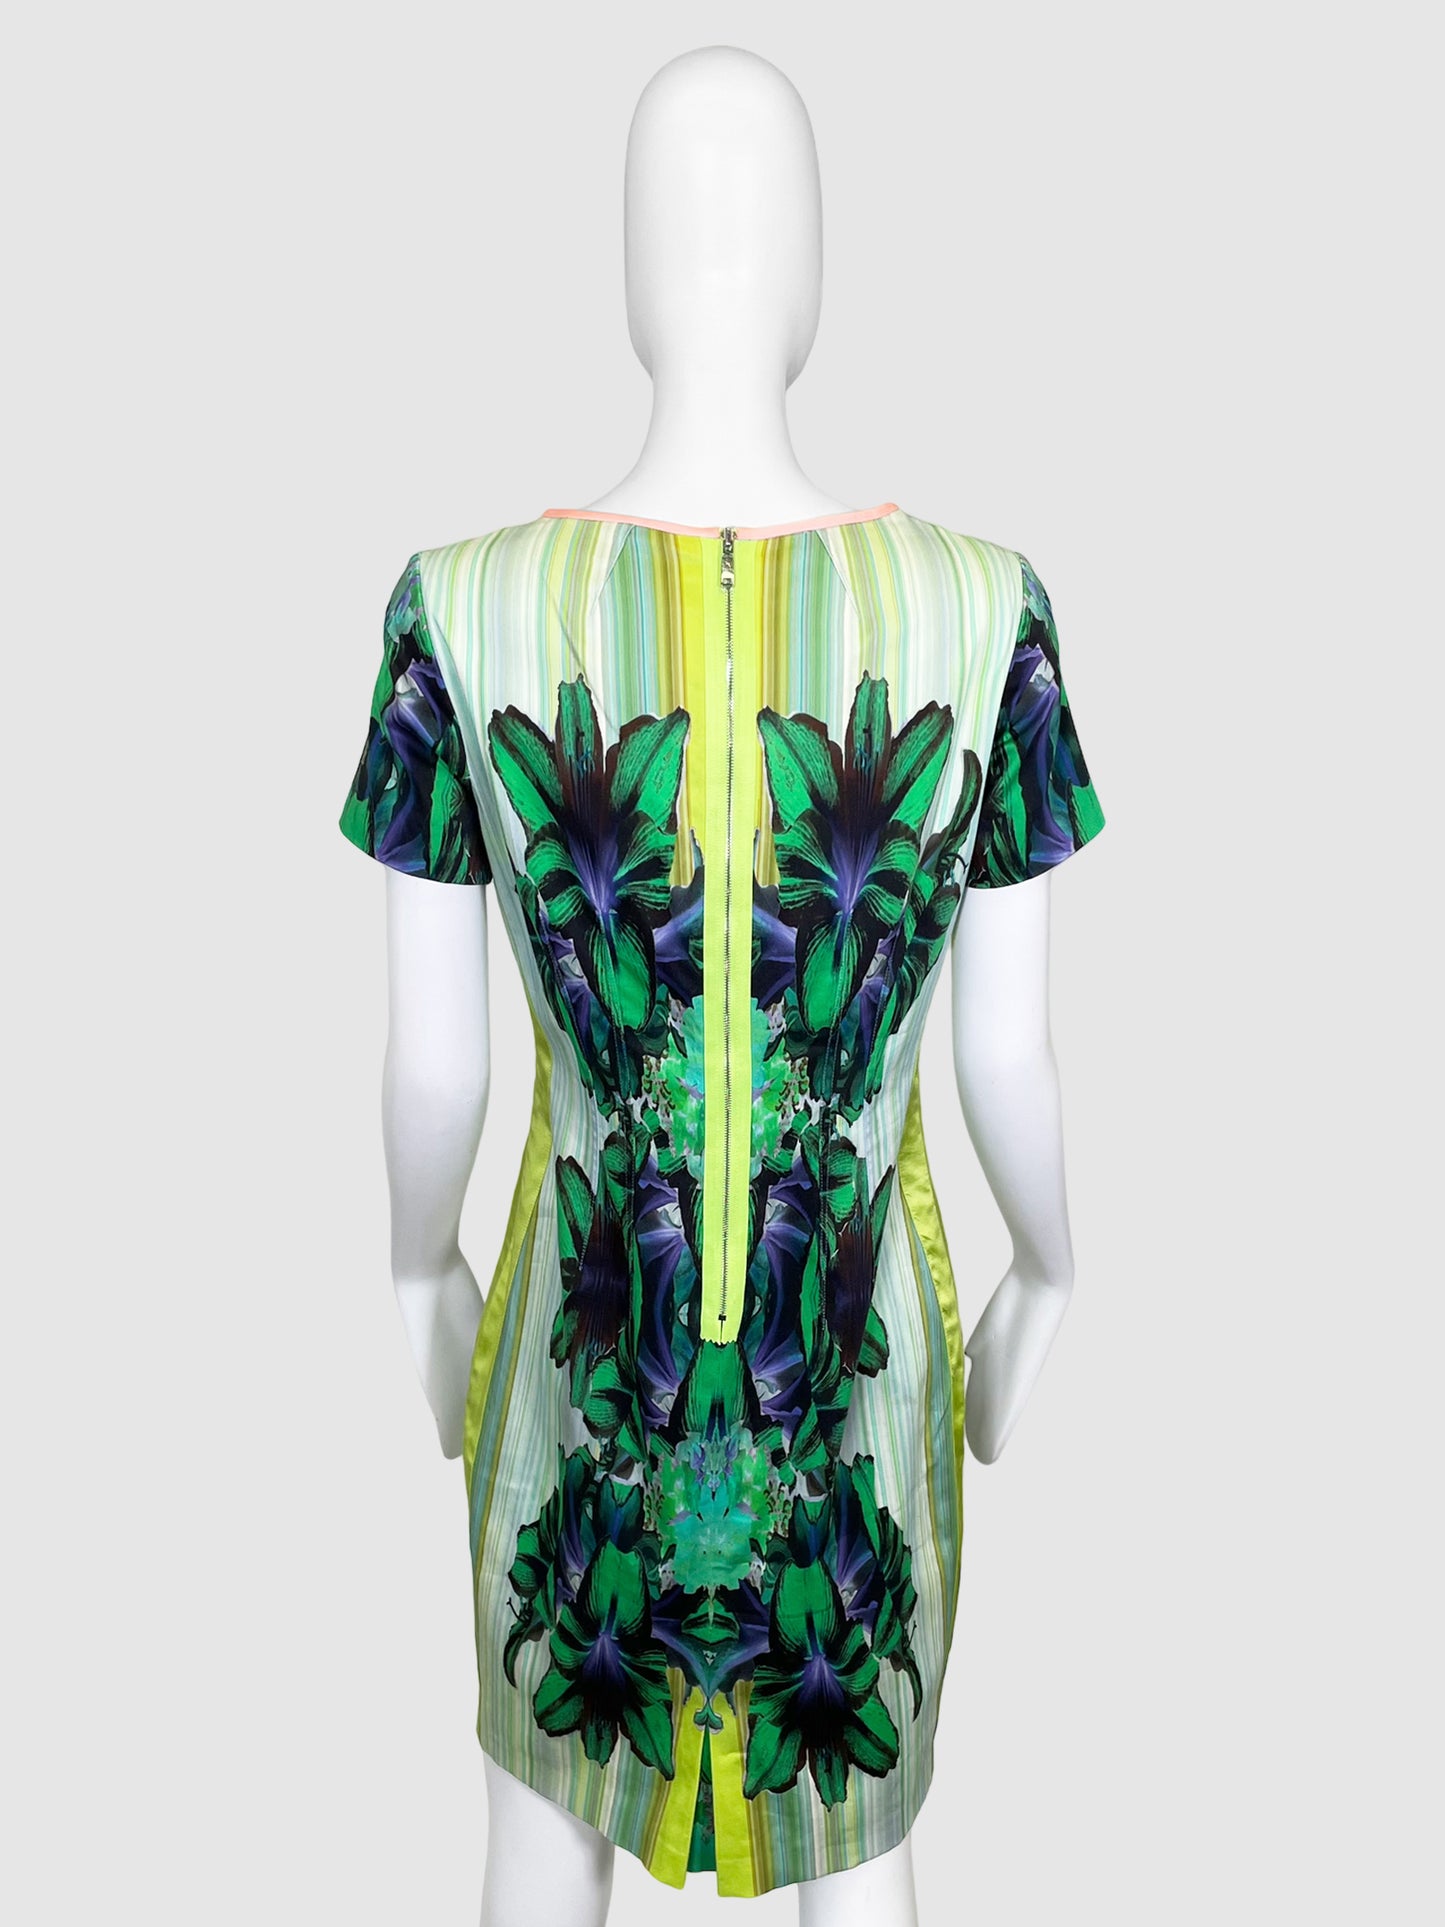 Elie Tahari Floral Abstract Print Dress - Size 10